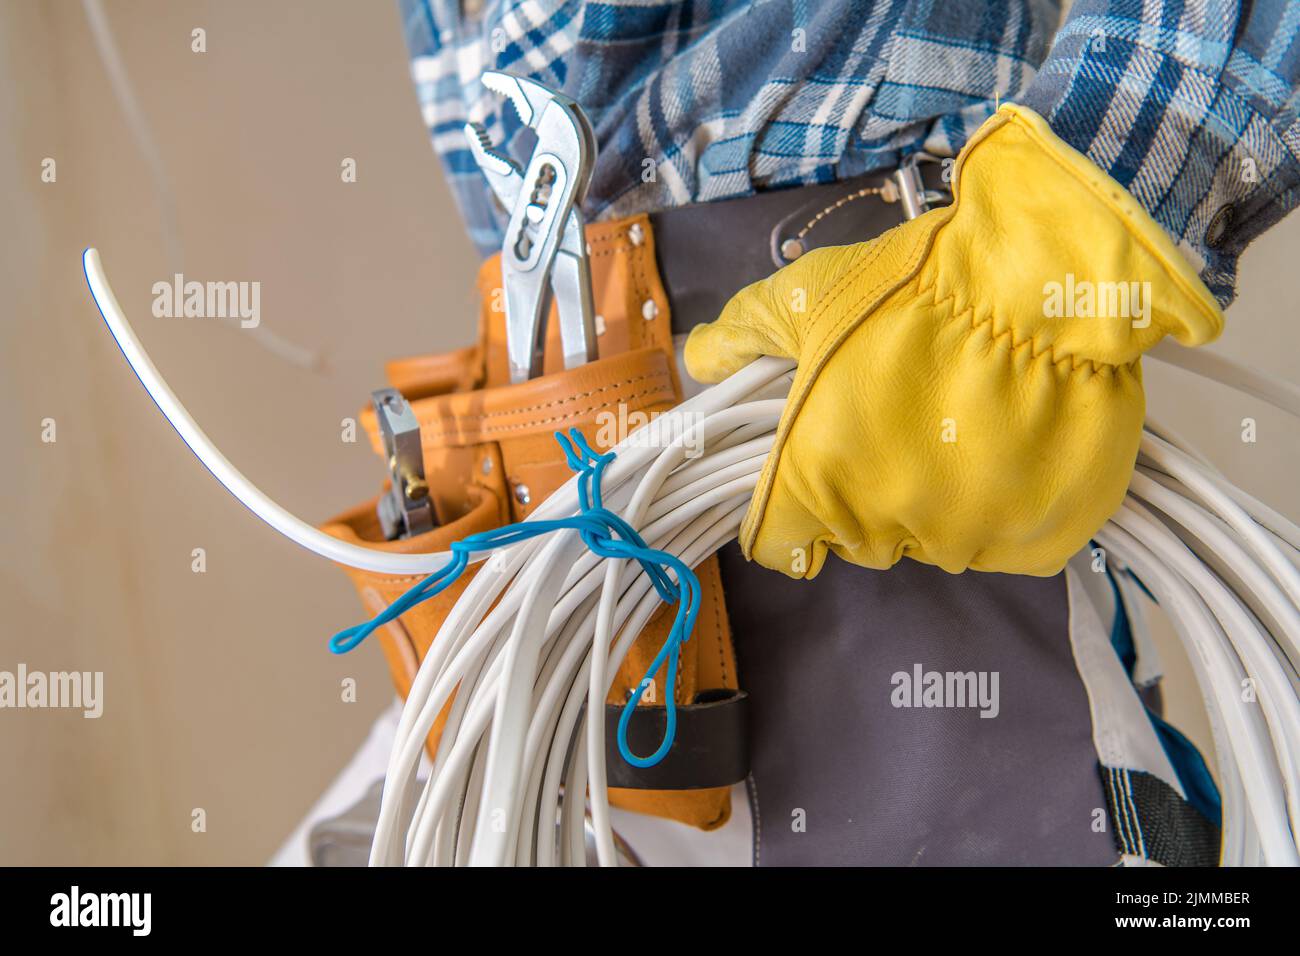 Closeup of White Electrical Cables Being Held in the Left Hand of an Electrician Wearing Yellow Protective Construction Gloves. Industrial Theme. Stock Photo